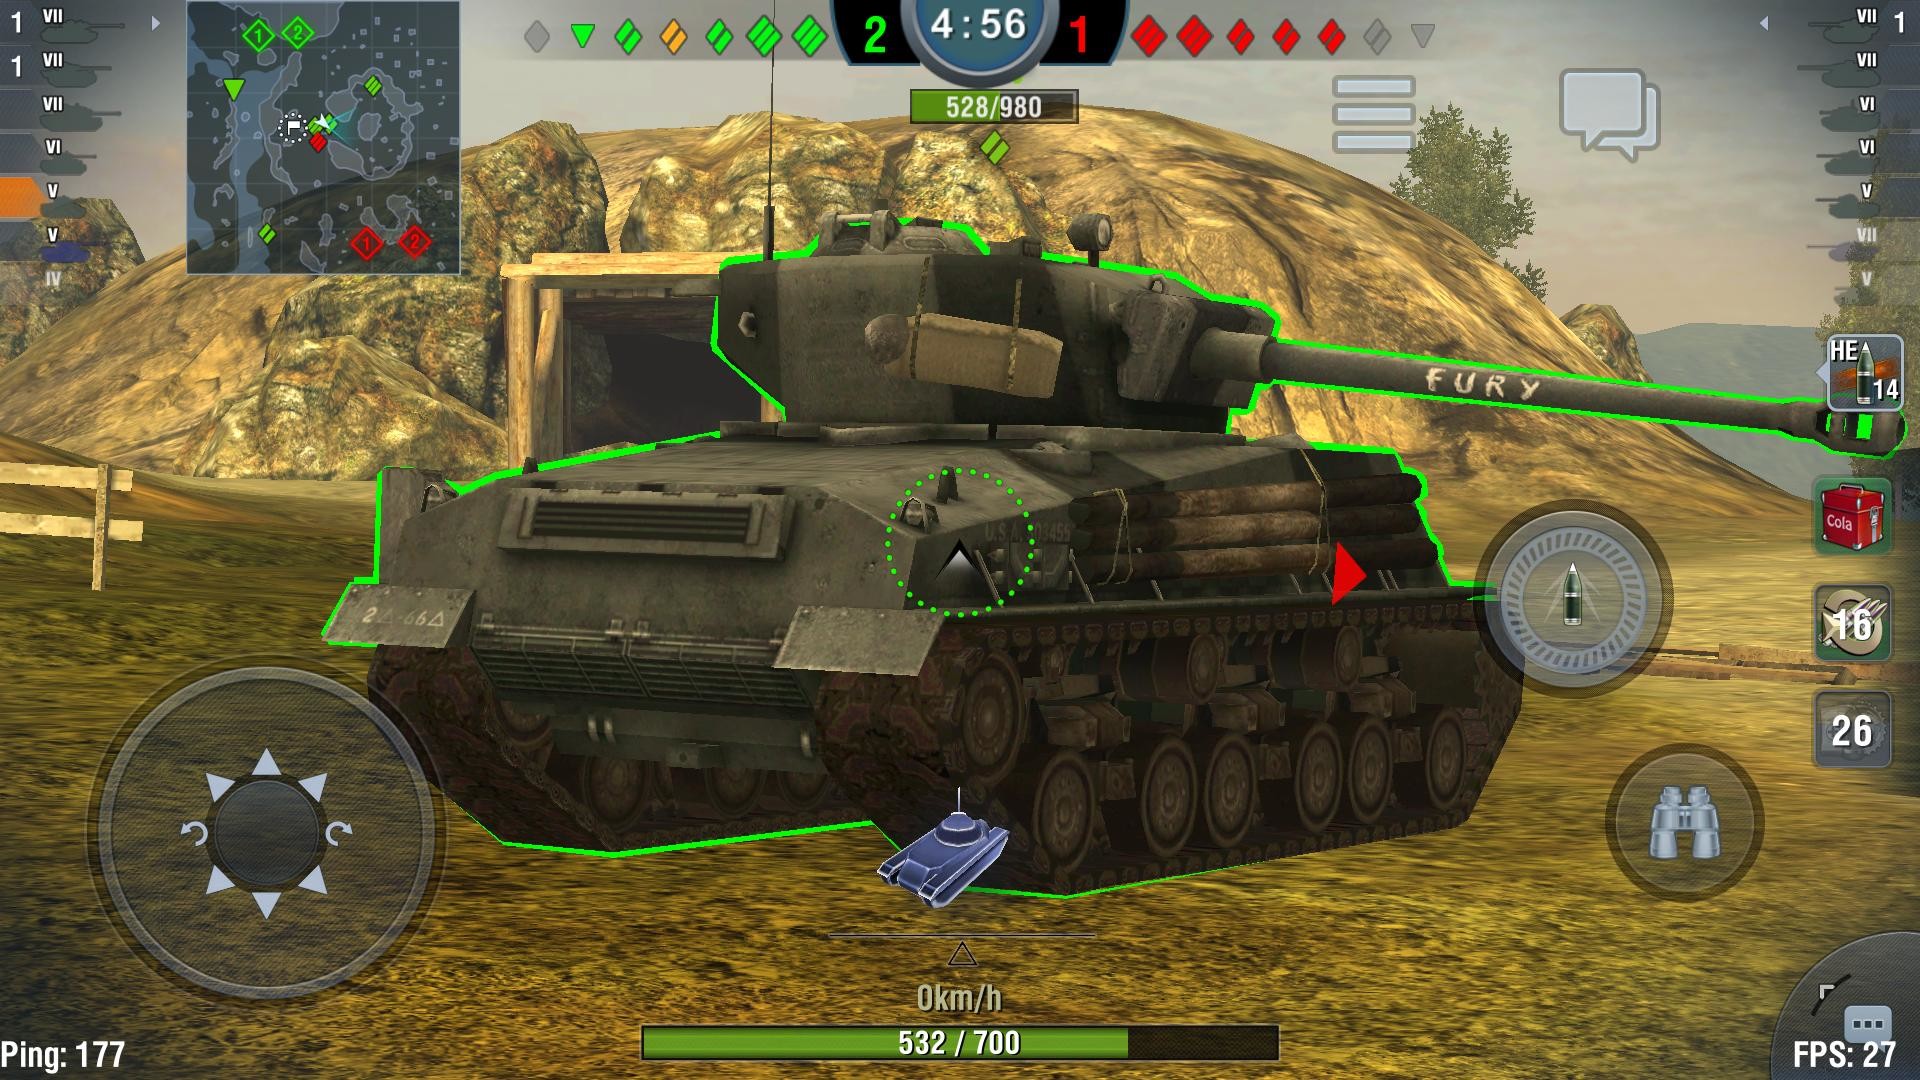 1920x1080 how can i get this,just notice on asia server fury m4 sherman,thanks.